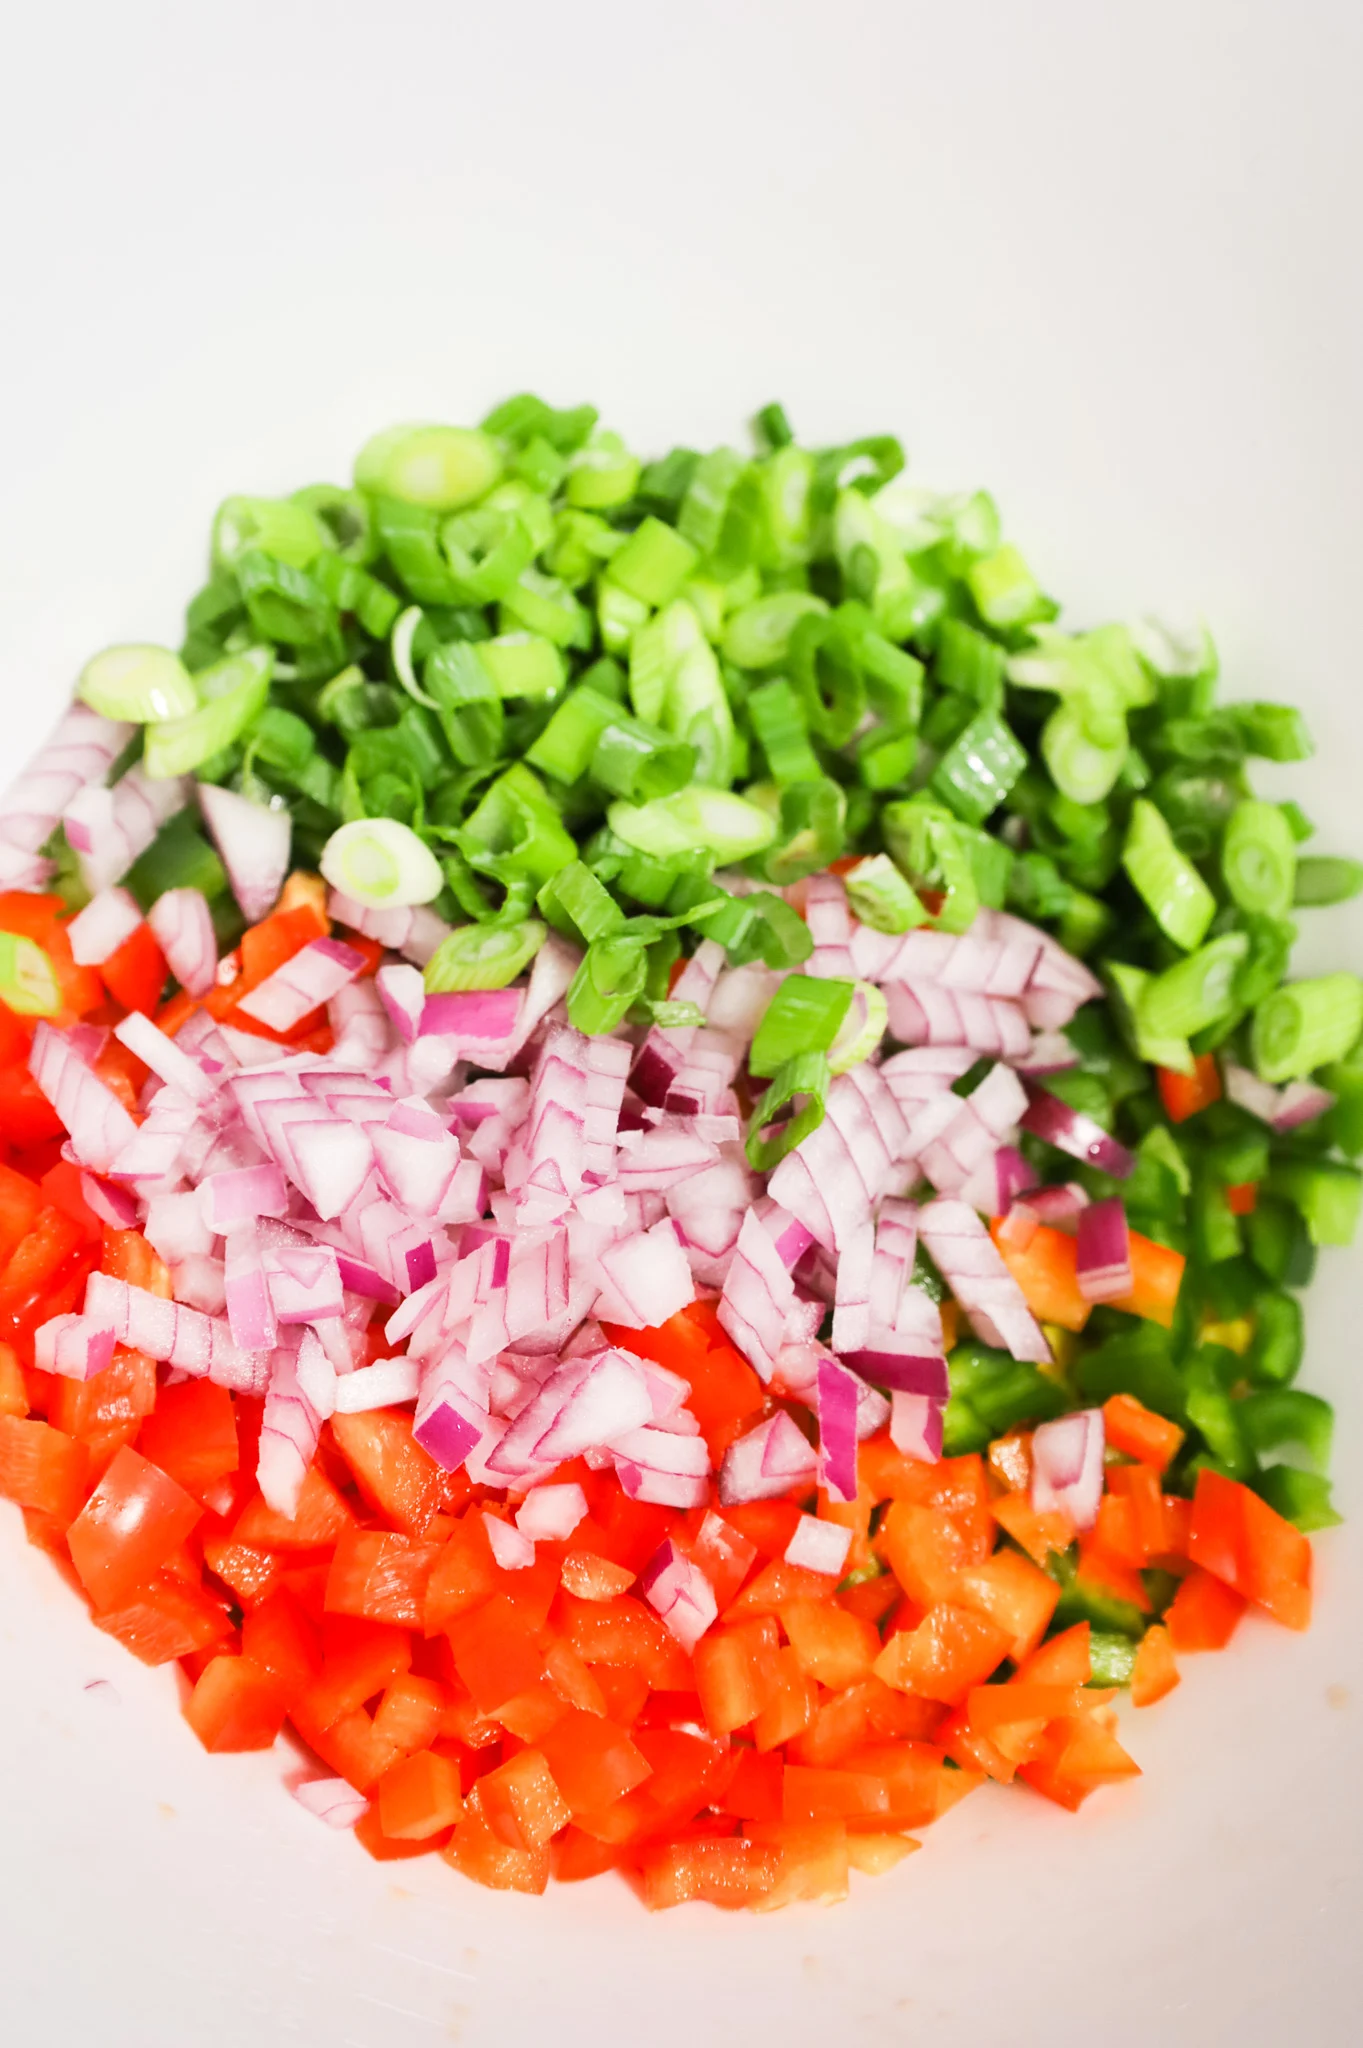 chopped green onions, diced red onions, diced red bell peppers and diced green bell peppers in a mixing bowl